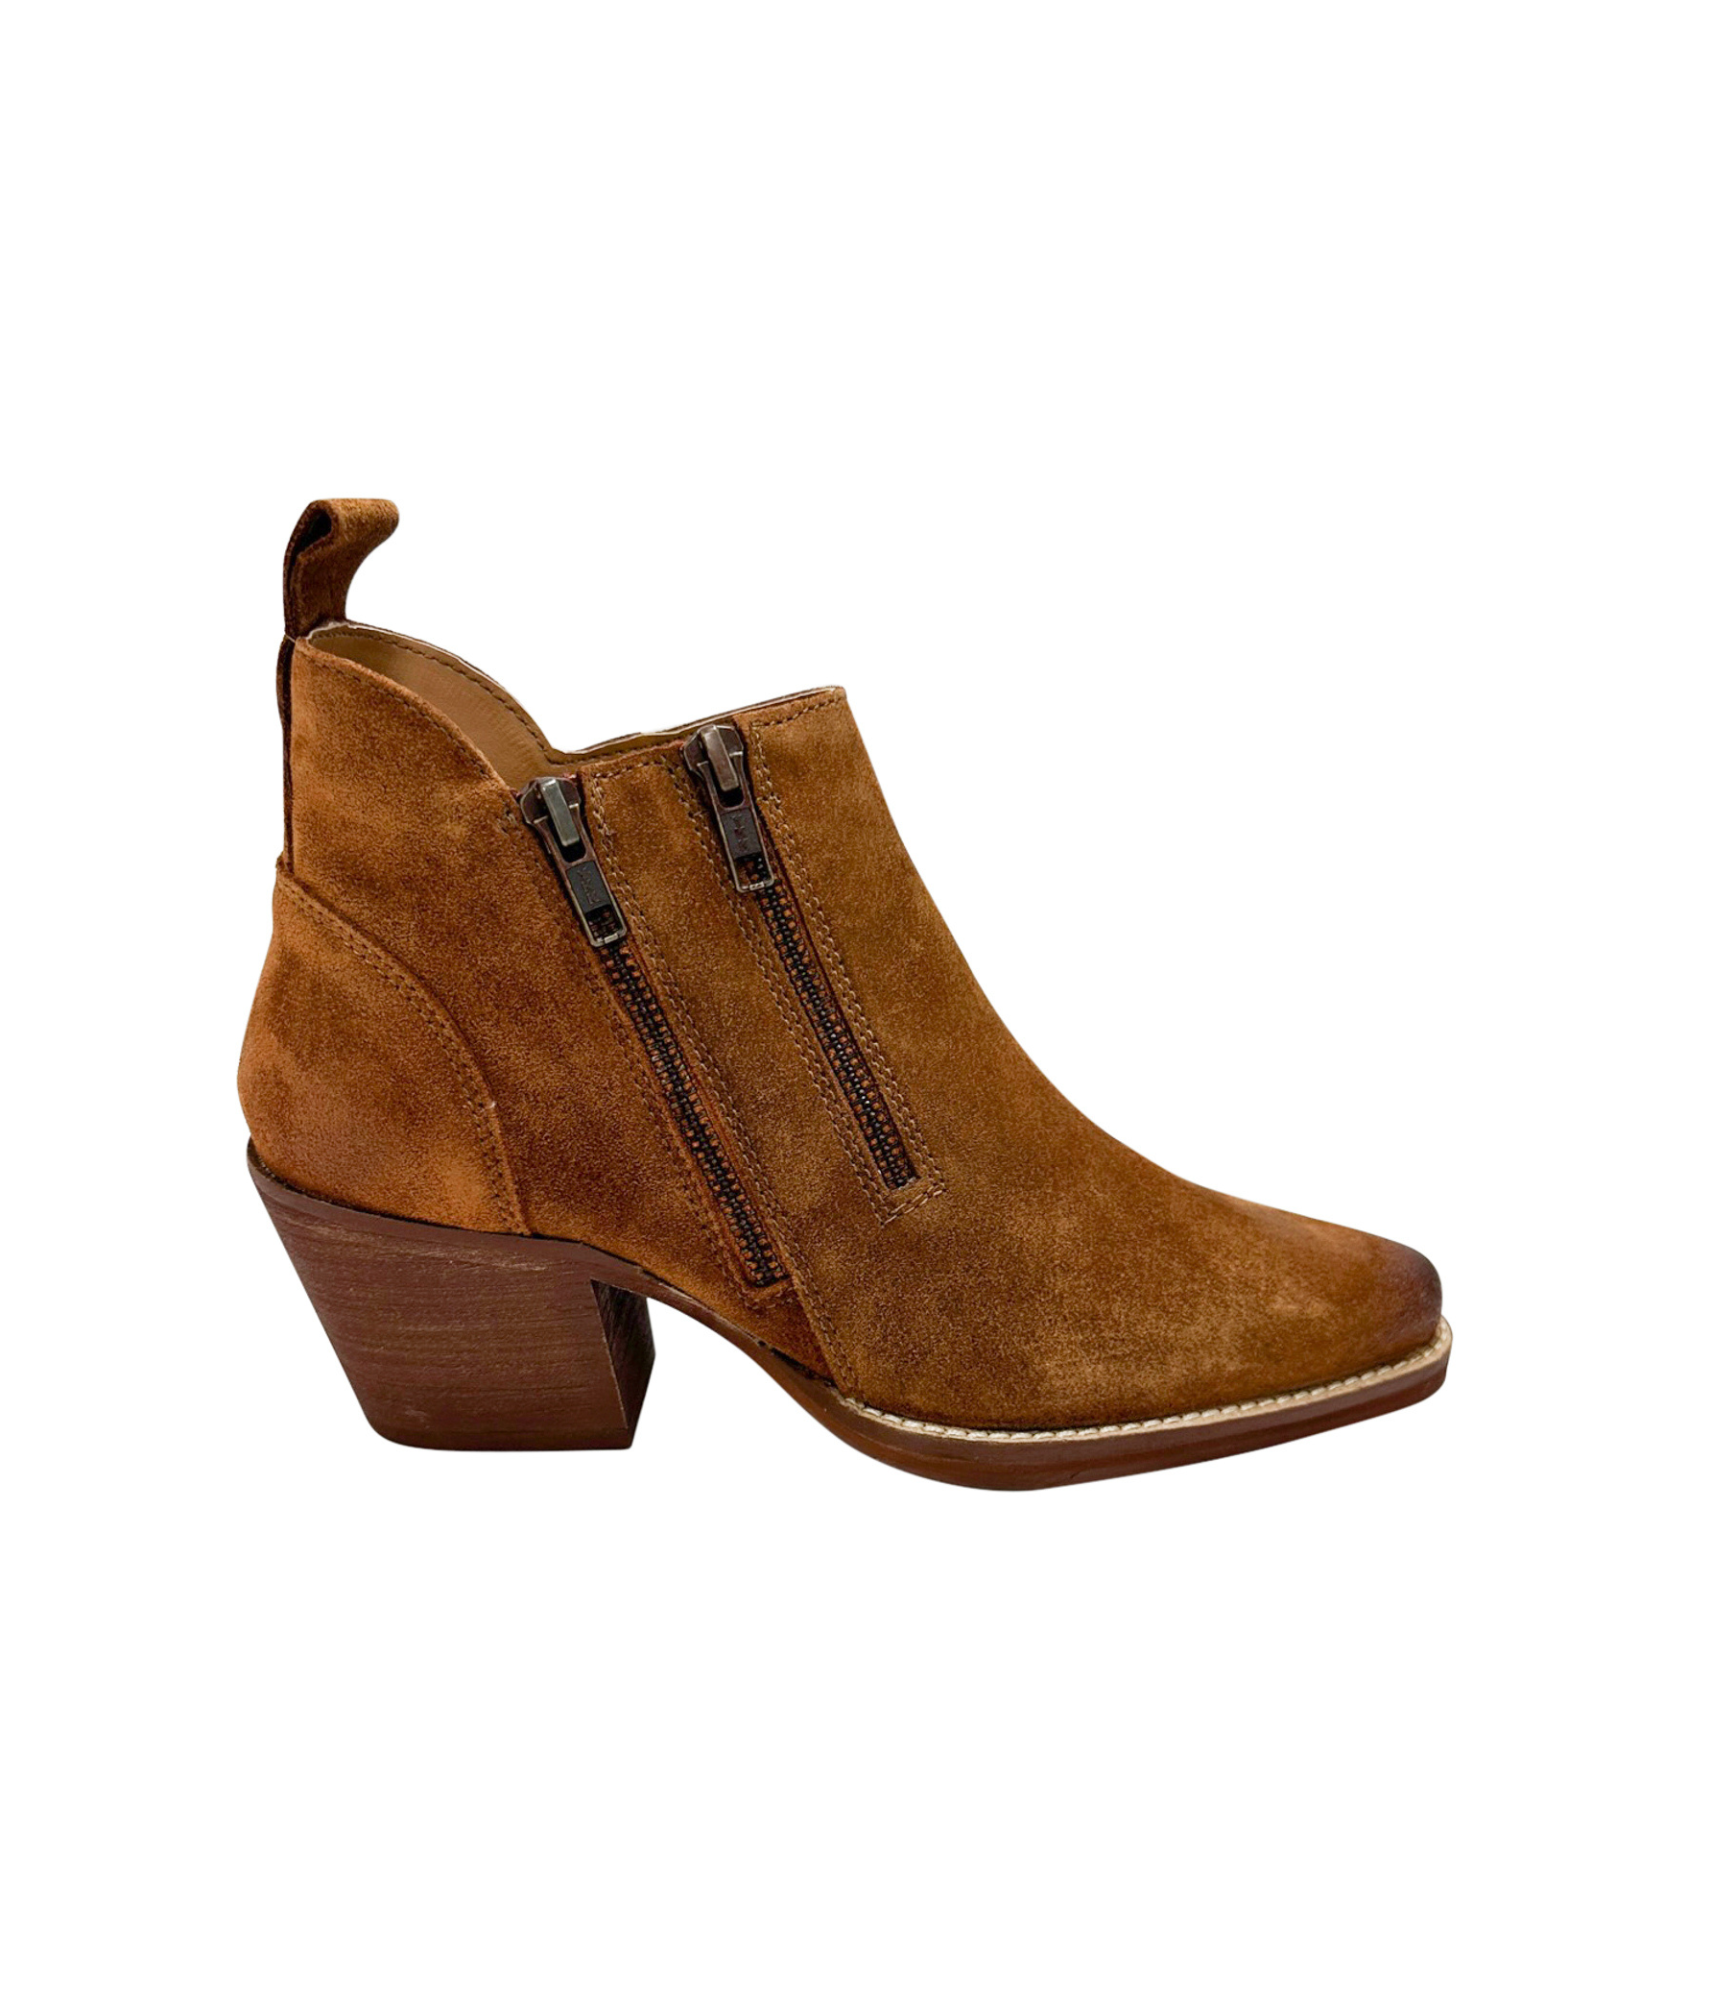 Bandit Suede Ankle Boot in Tan